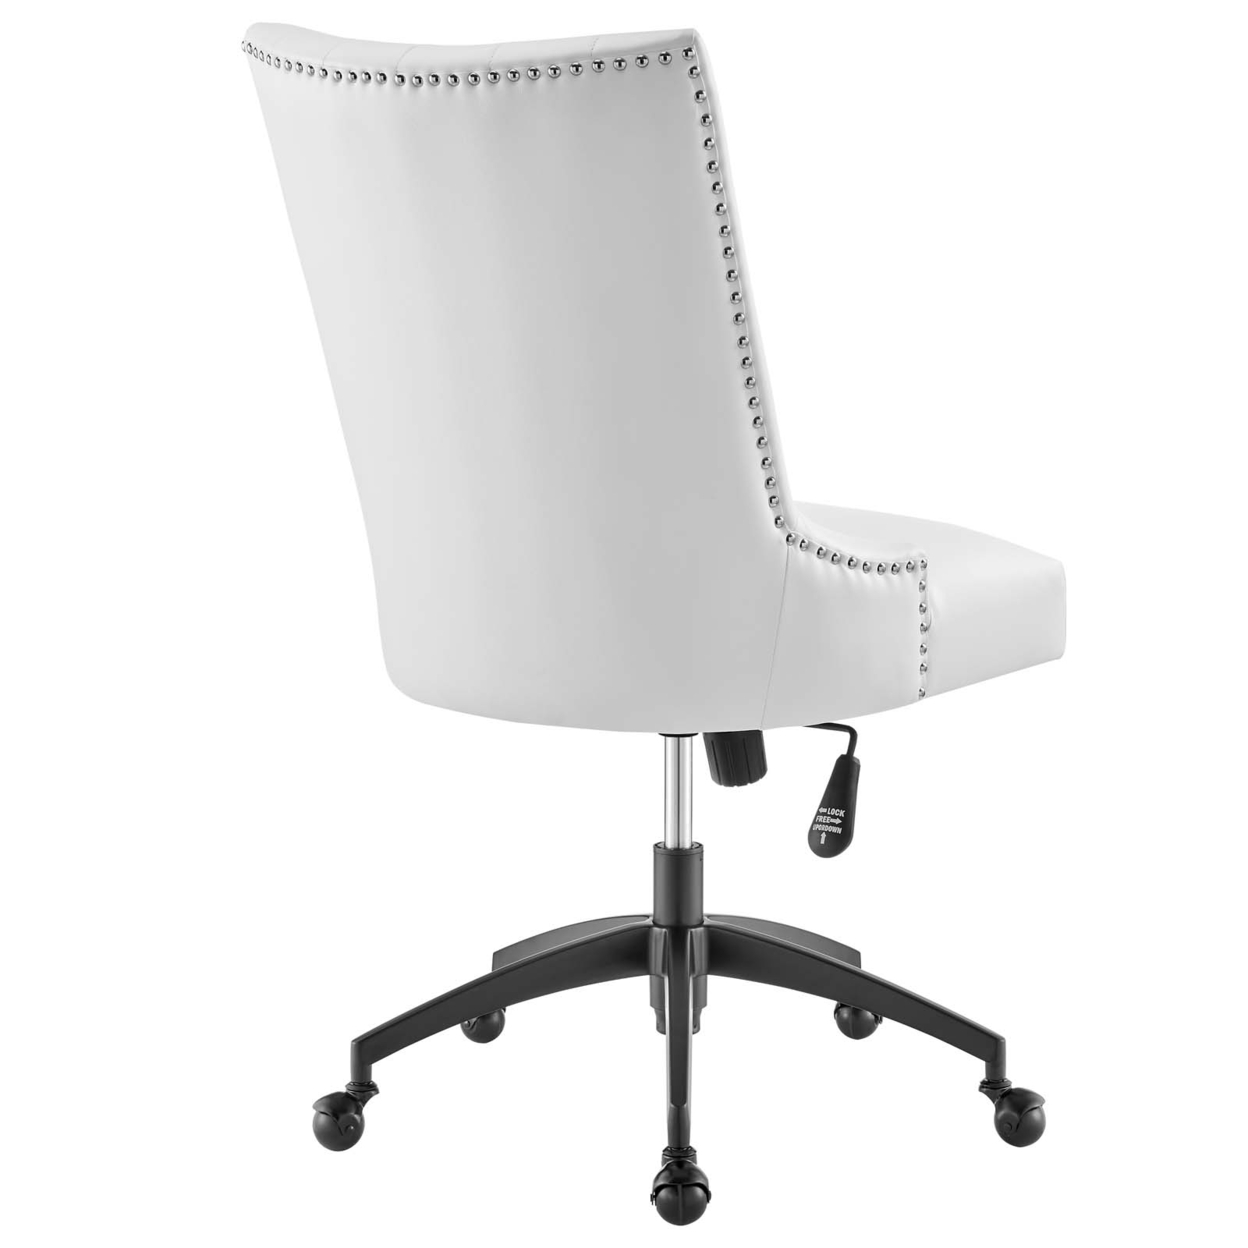 Empower Channel Tufted Vegan Leather Office Chair, Black White